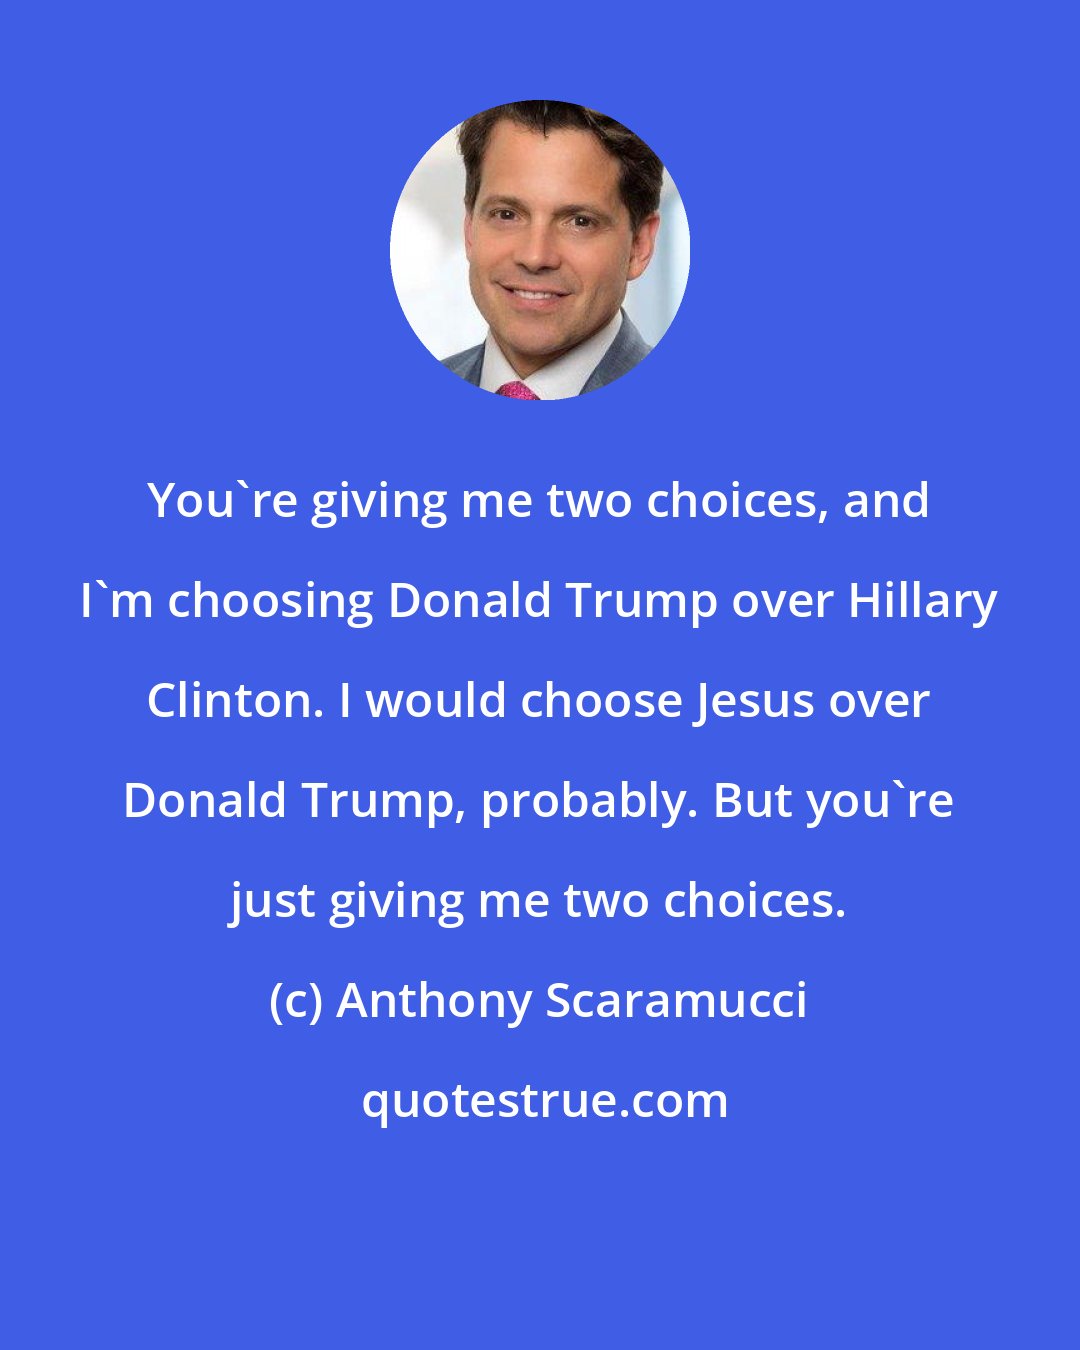 Anthony Scaramucci: You're giving me two choices, and I'm choosing Donald Trump over Hillary Clinton. I would choose Jesus over Donald Trump, probably. But you're just giving me two choices.